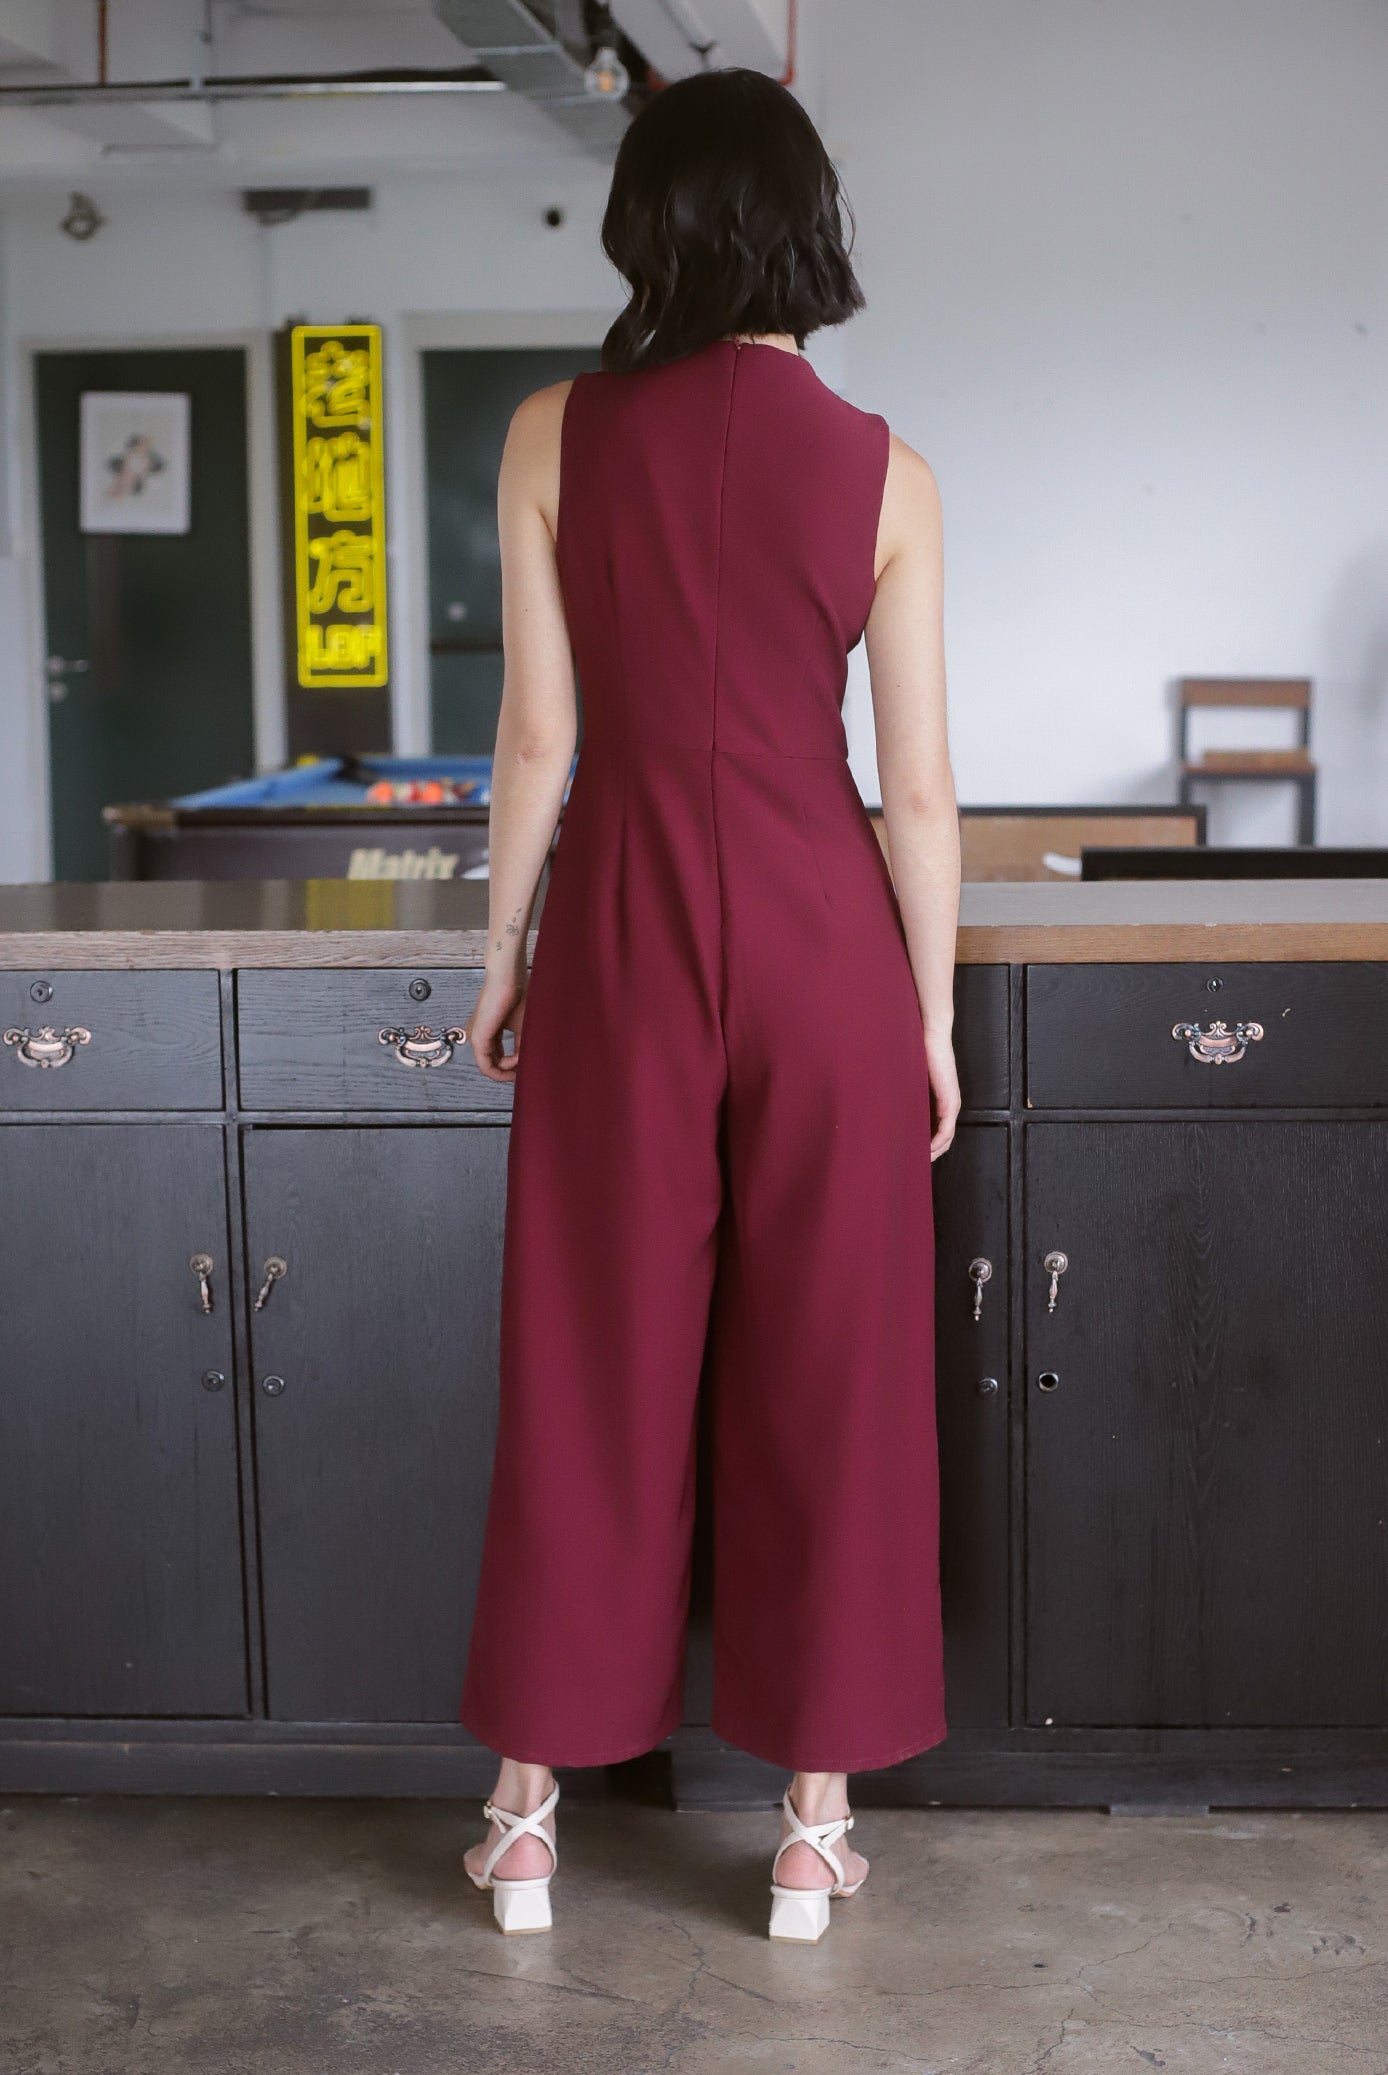 *Premium* Chanelle Classy Jumpsuit In Wine Red